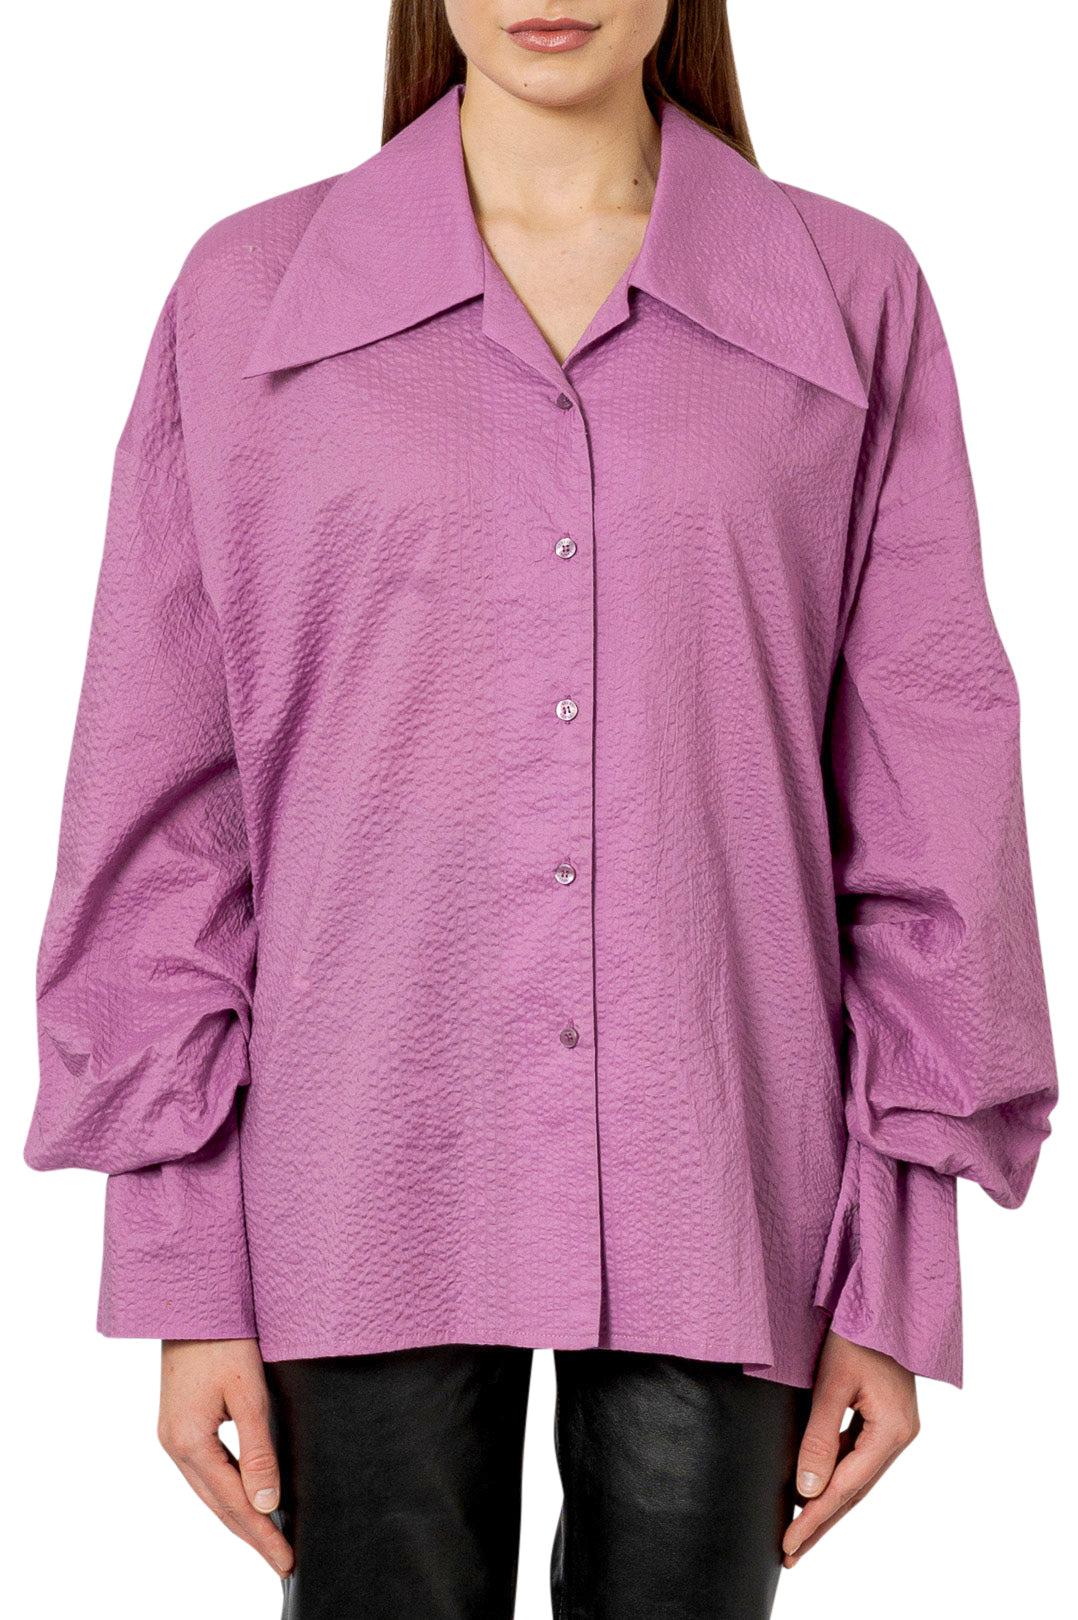 Lebrand-Over-fit shirt with ruffled detail-PELMO SHIRT-dgallerystore